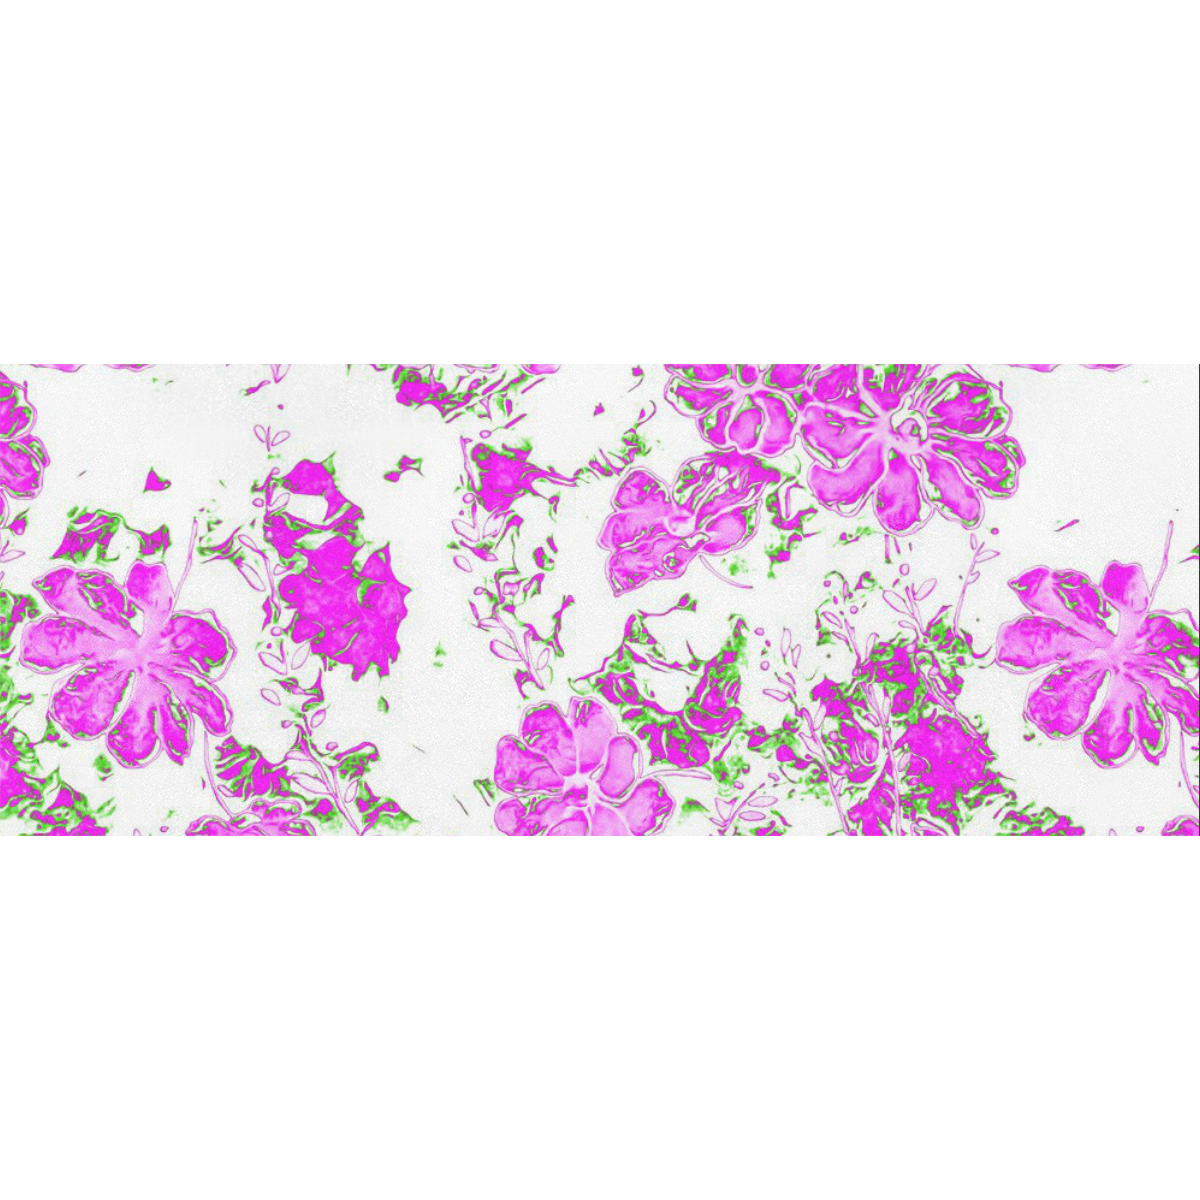 floral dreams 12 F by JamColors Gift Wrapping Paper 58"x 23" (2 Rolls)